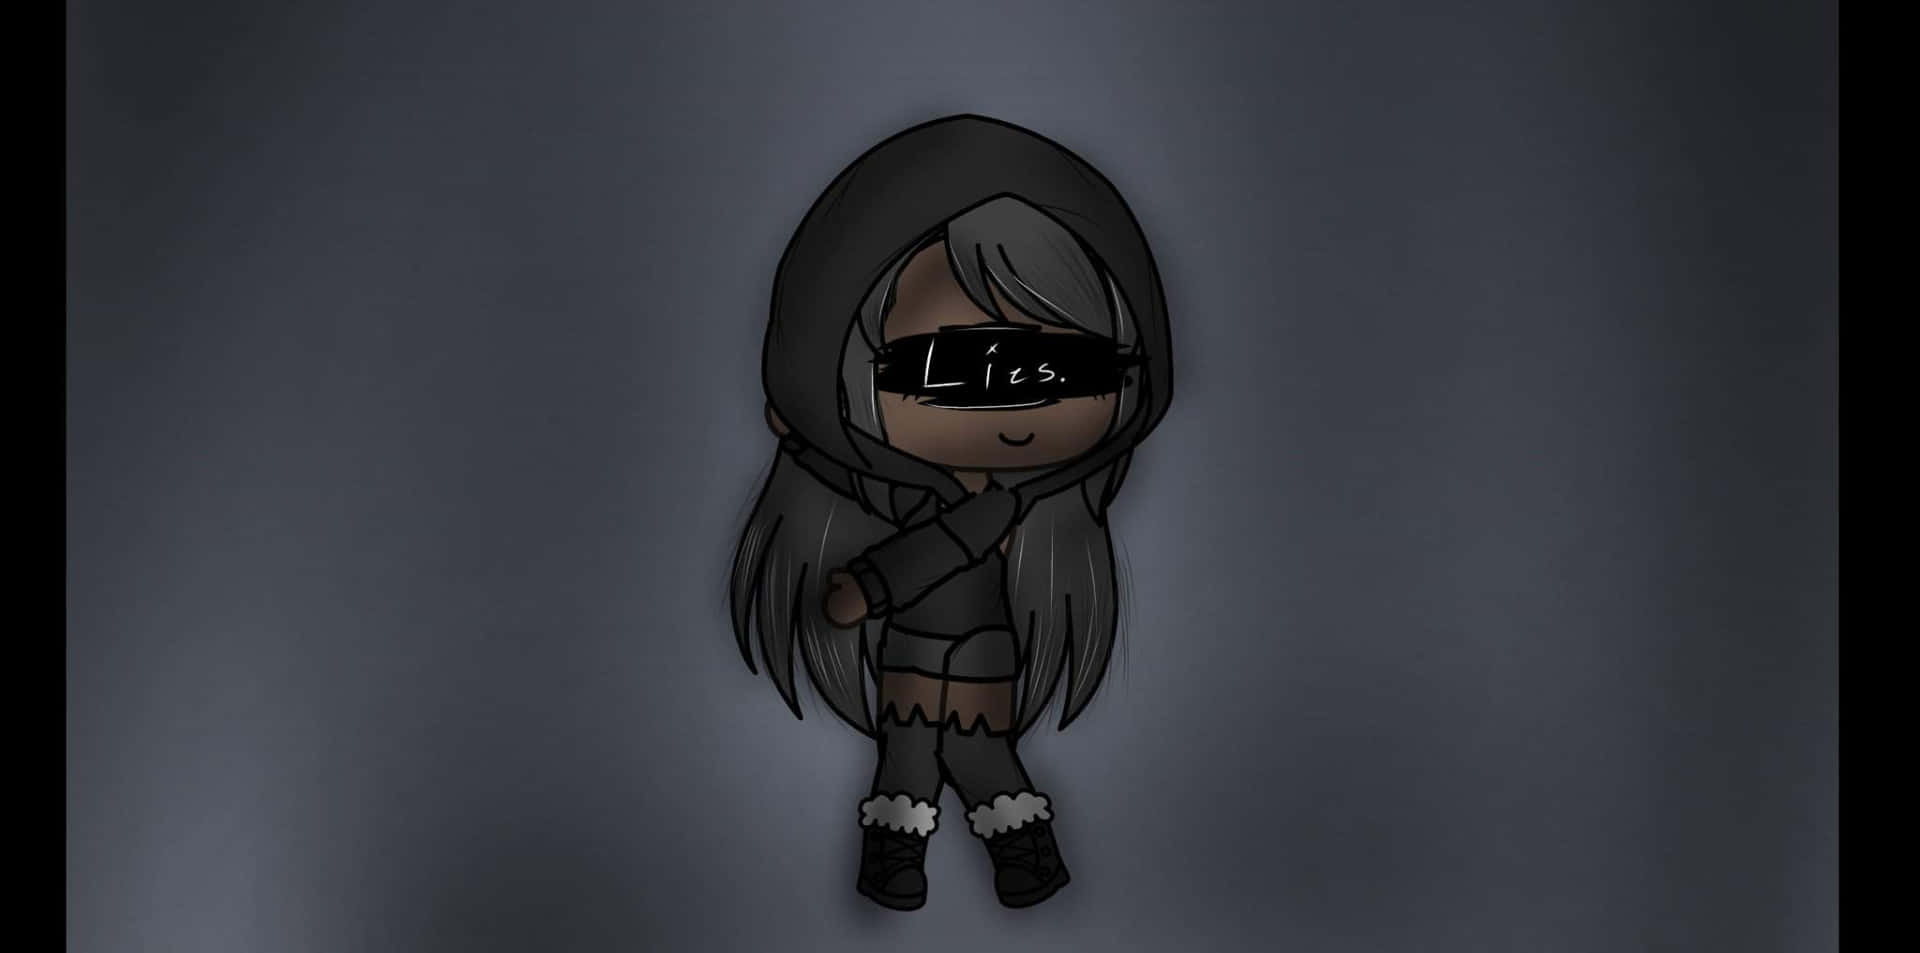 Girl With Hoodie - Edgy PFP Wallpaper